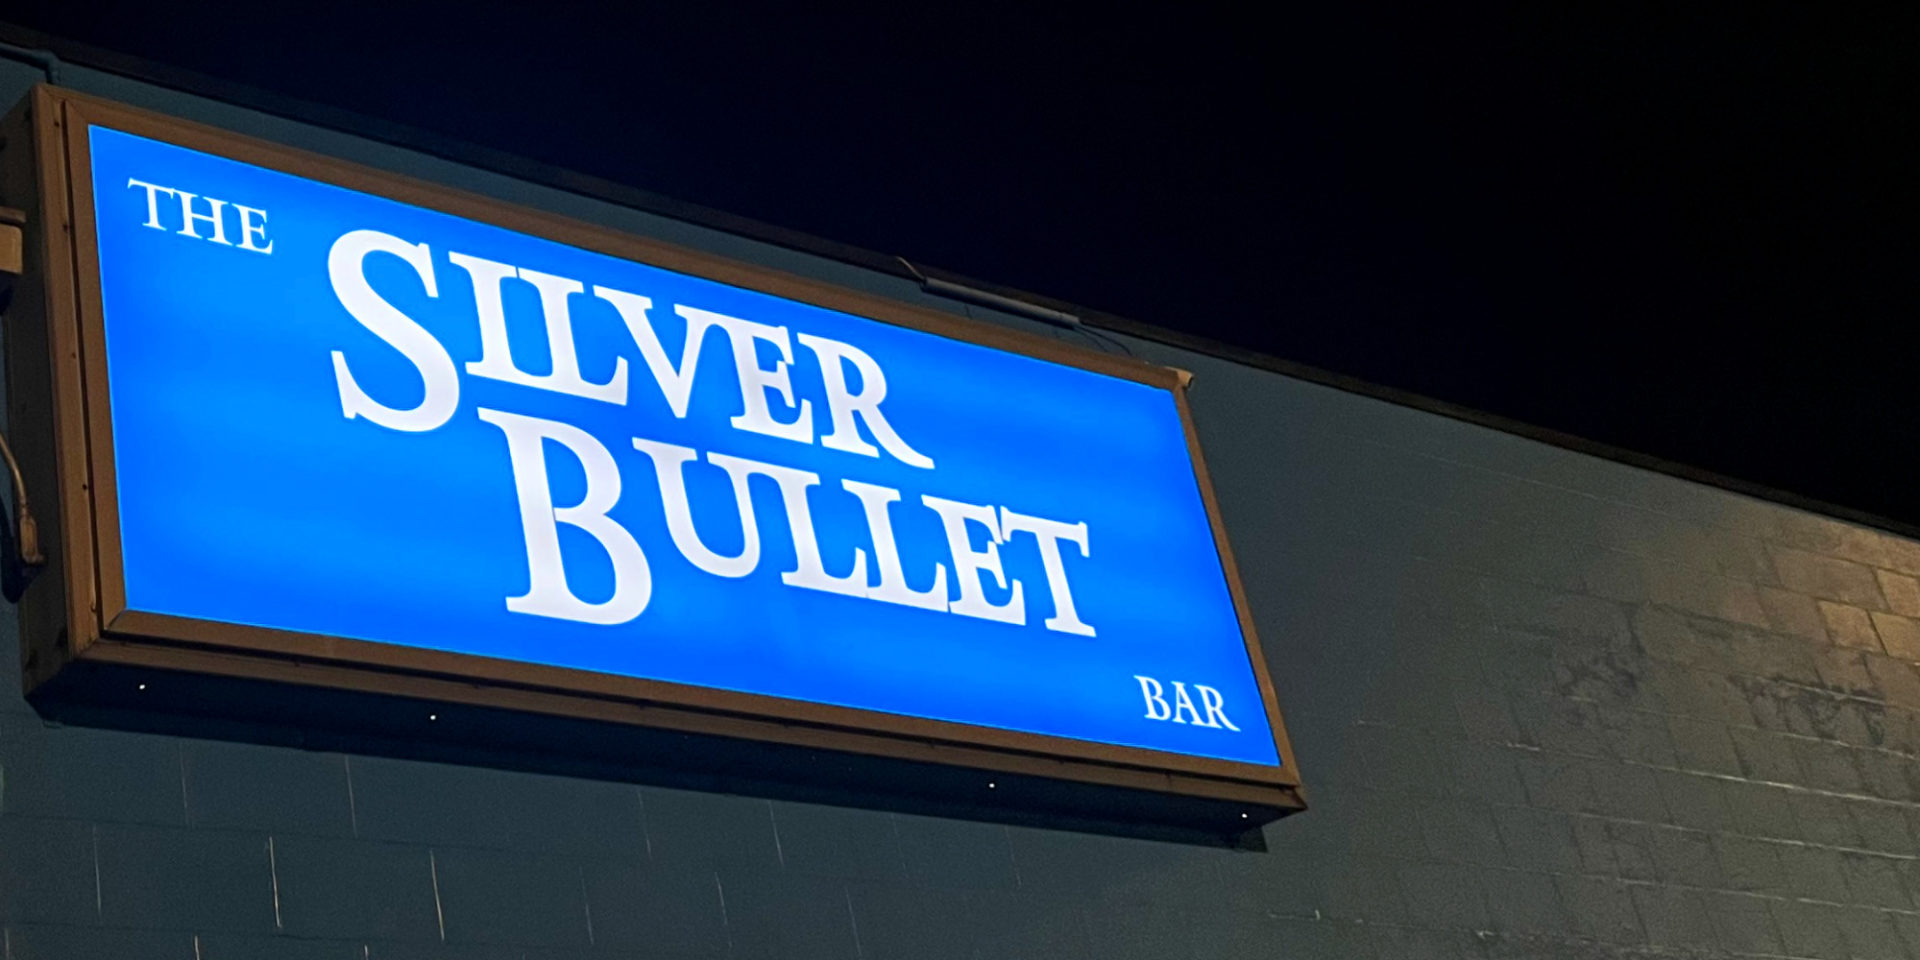 The Silver Bullet Bar at night with the blue sign illuminated.